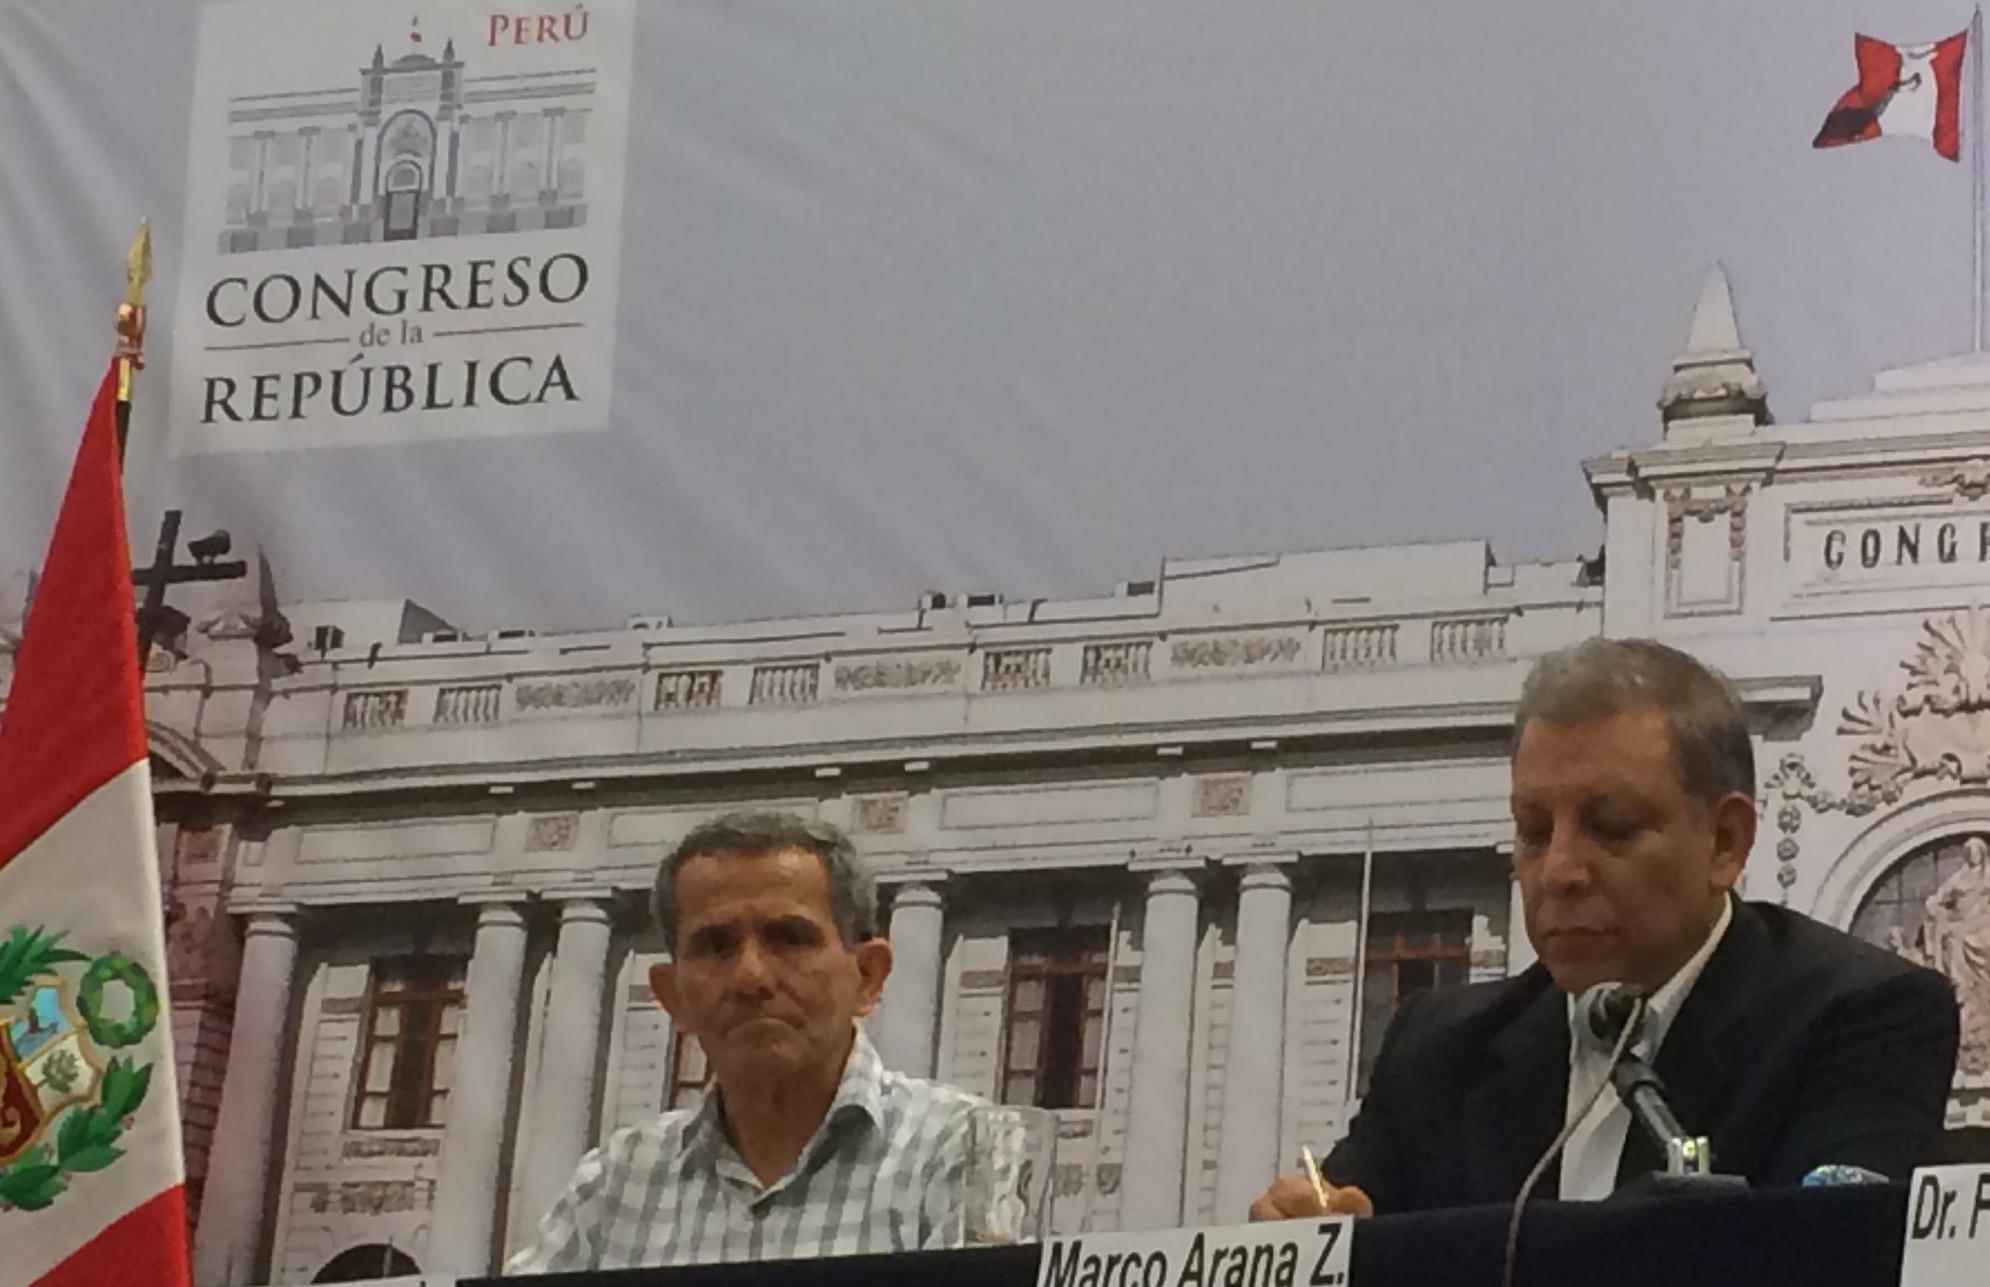 Conrado Olivera (director of Joining Hands network in Peru) sits alongside Representative Marco Arrano at the Peruvian Congress as they make their case for a national Environmental Health program (photo by Jed Koball)